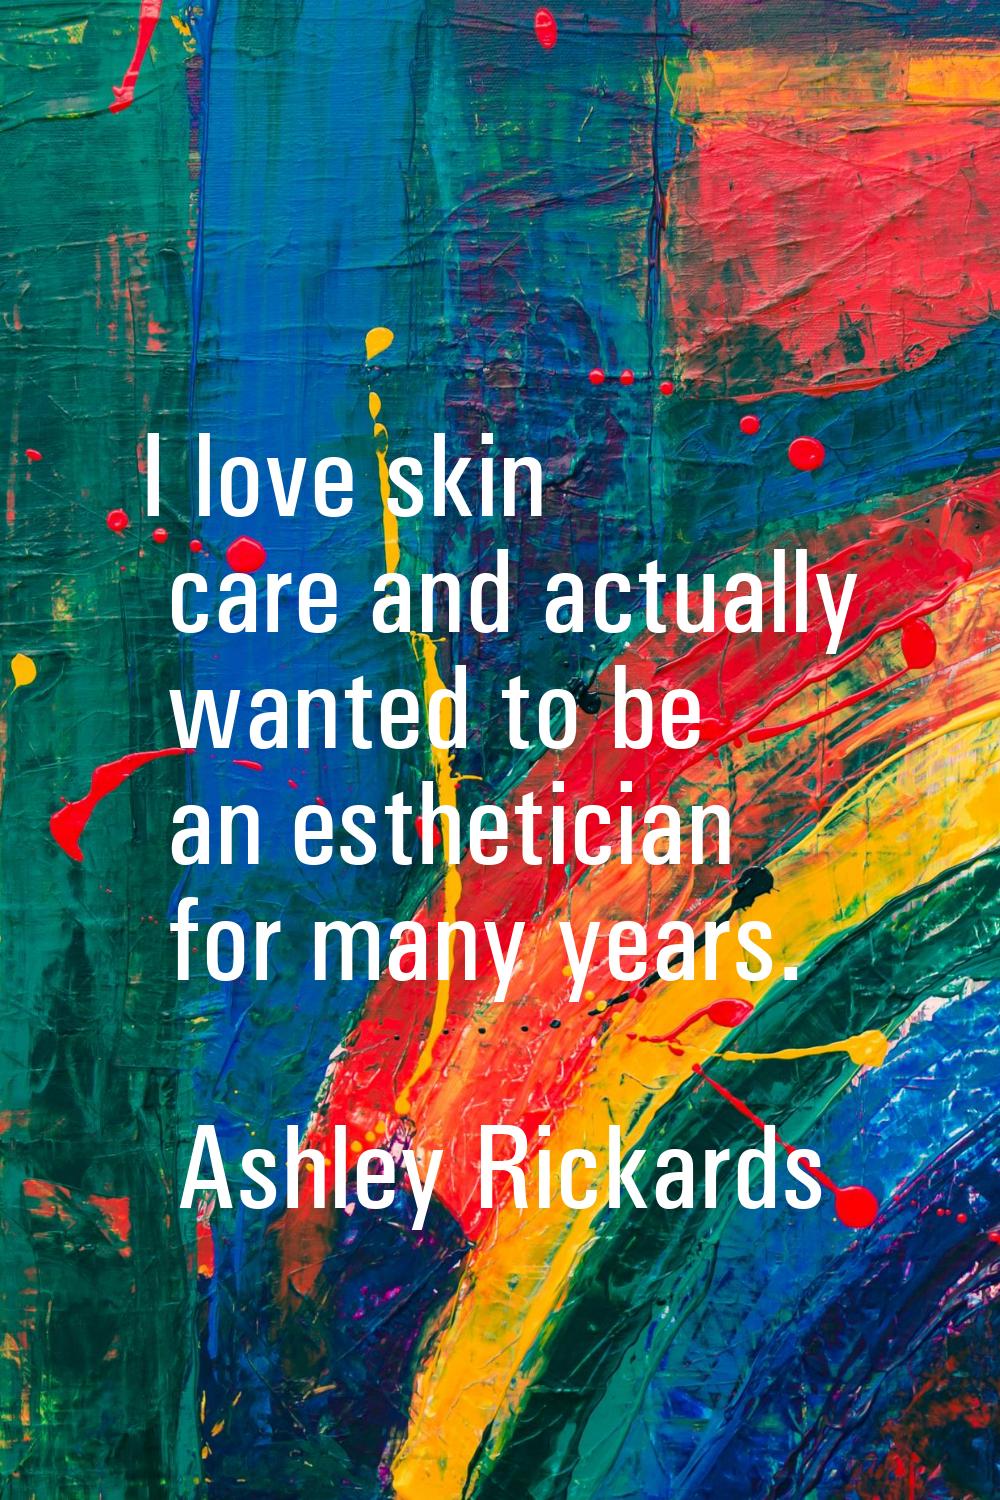 I love skin care and actually wanted to be an esthetician for many years.